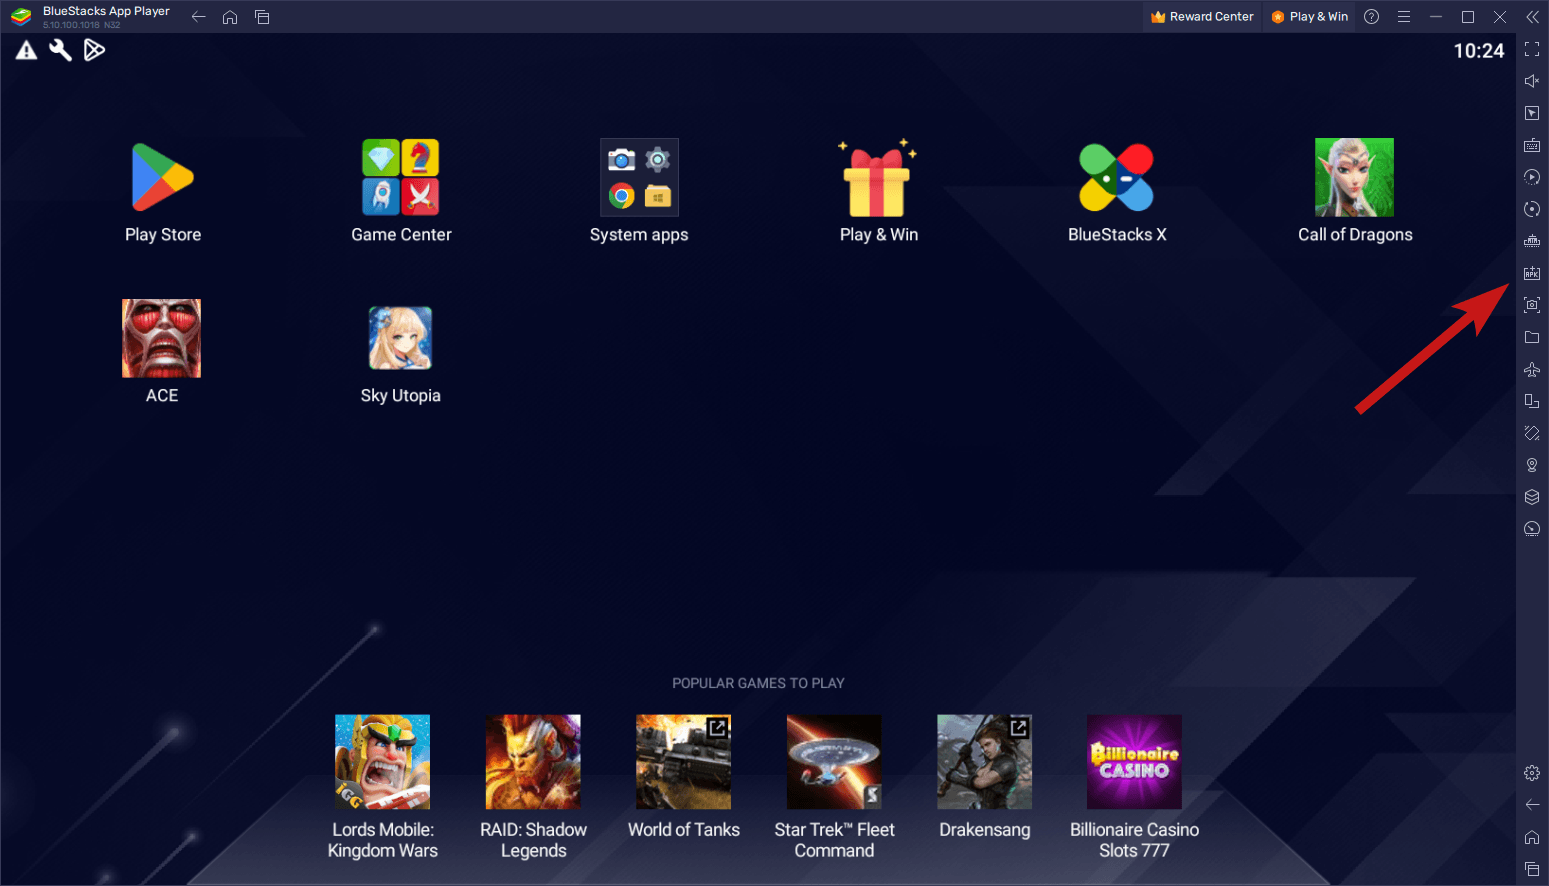 How to install an app from App Center, Play Store or using an APK on  BlueStacks 5 – BlueStacks Support